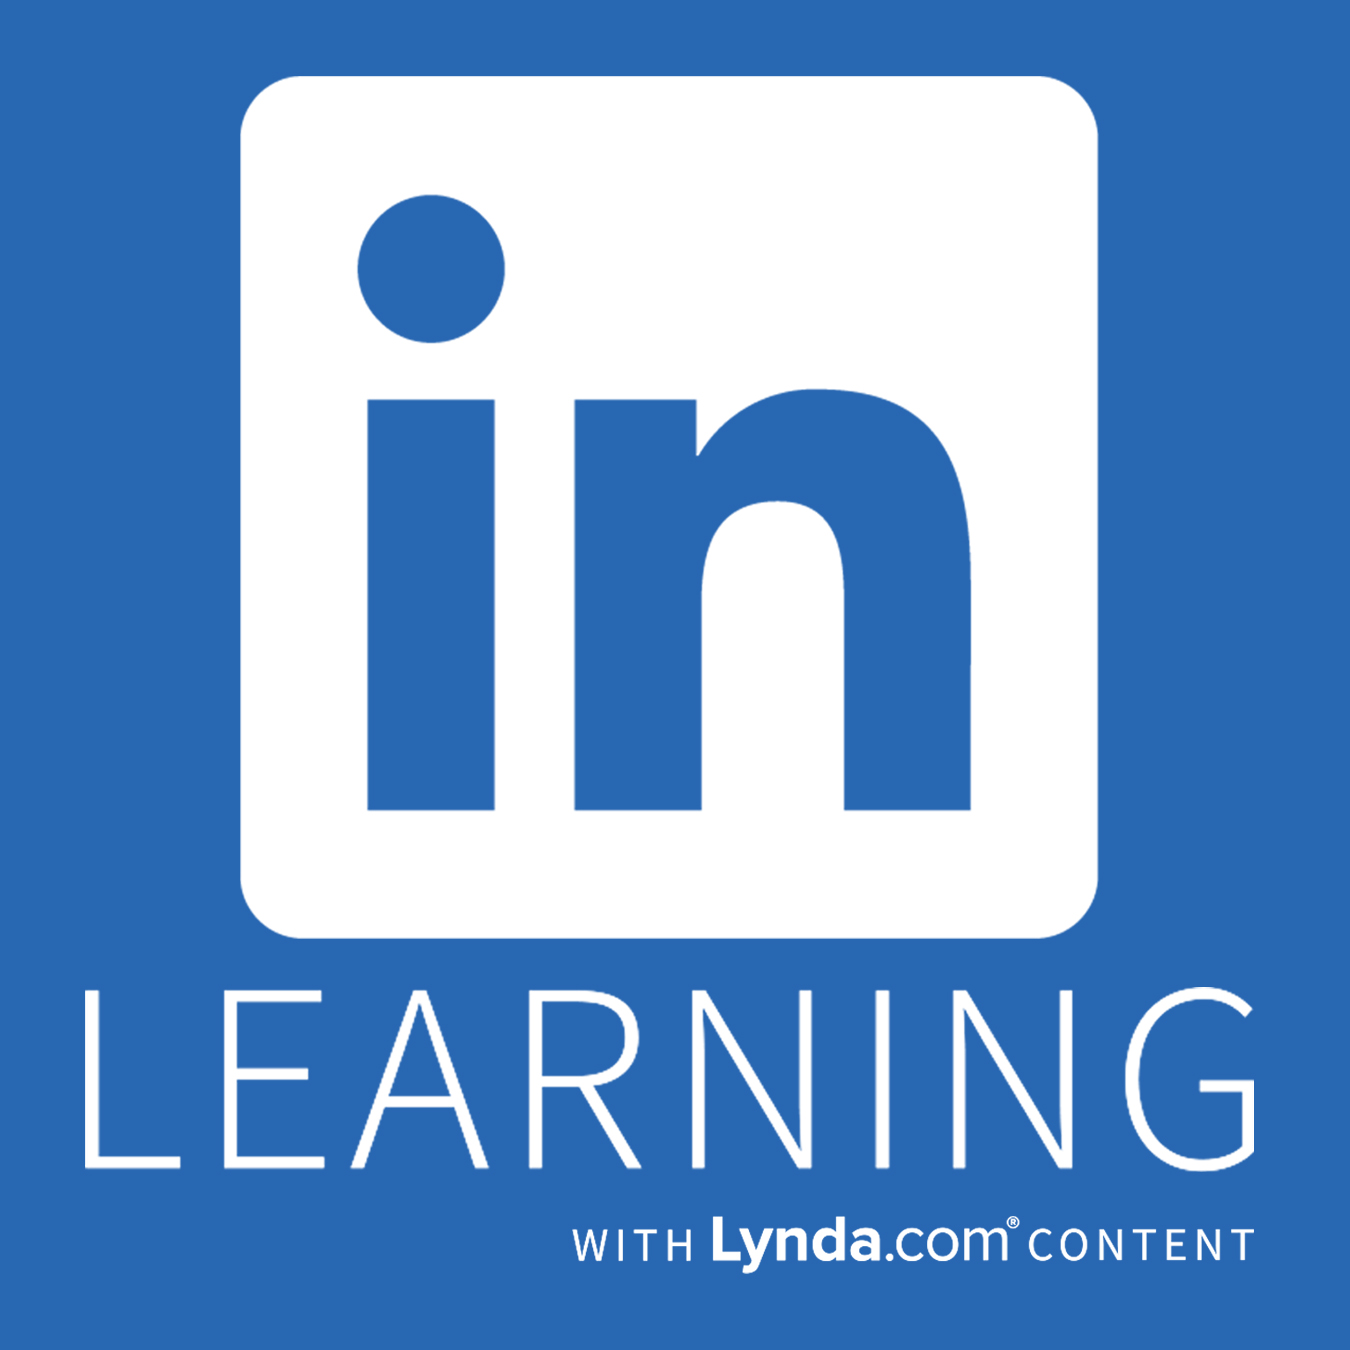 Linked In Learning with Lynda dot com content